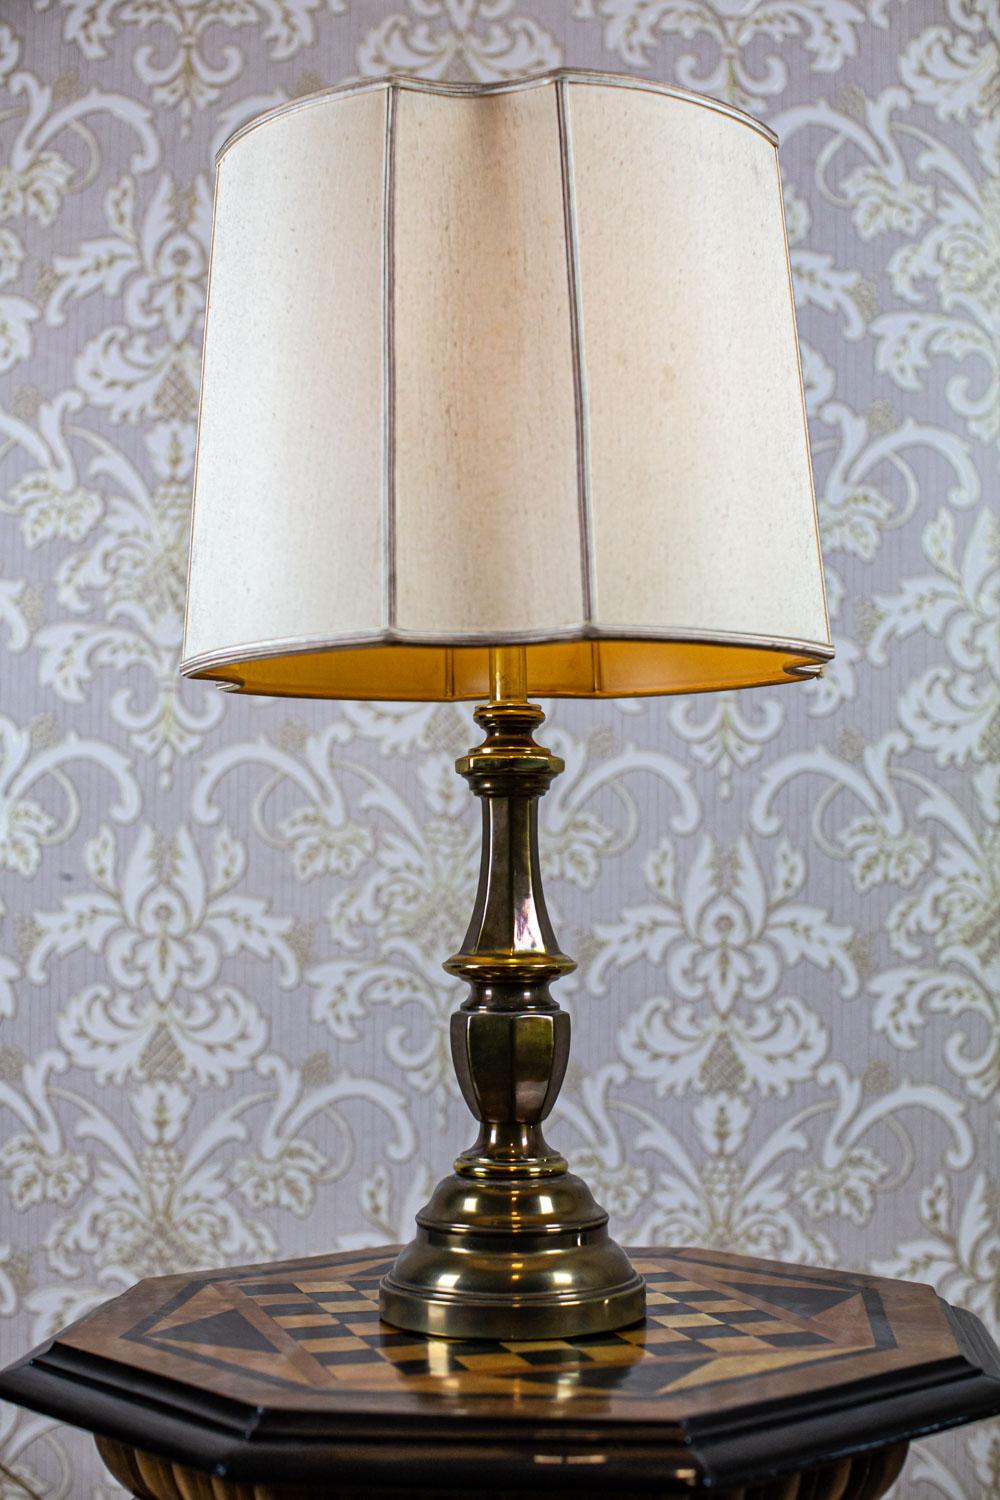 Electric Table Lamp from the 20th Century on Metal Base

We present you this electric table lamp from the 2nd half of the 20th century.
The base is made of metal, whereas the shade of a fabric with a wavy trim.
There is a single E27 light bulb